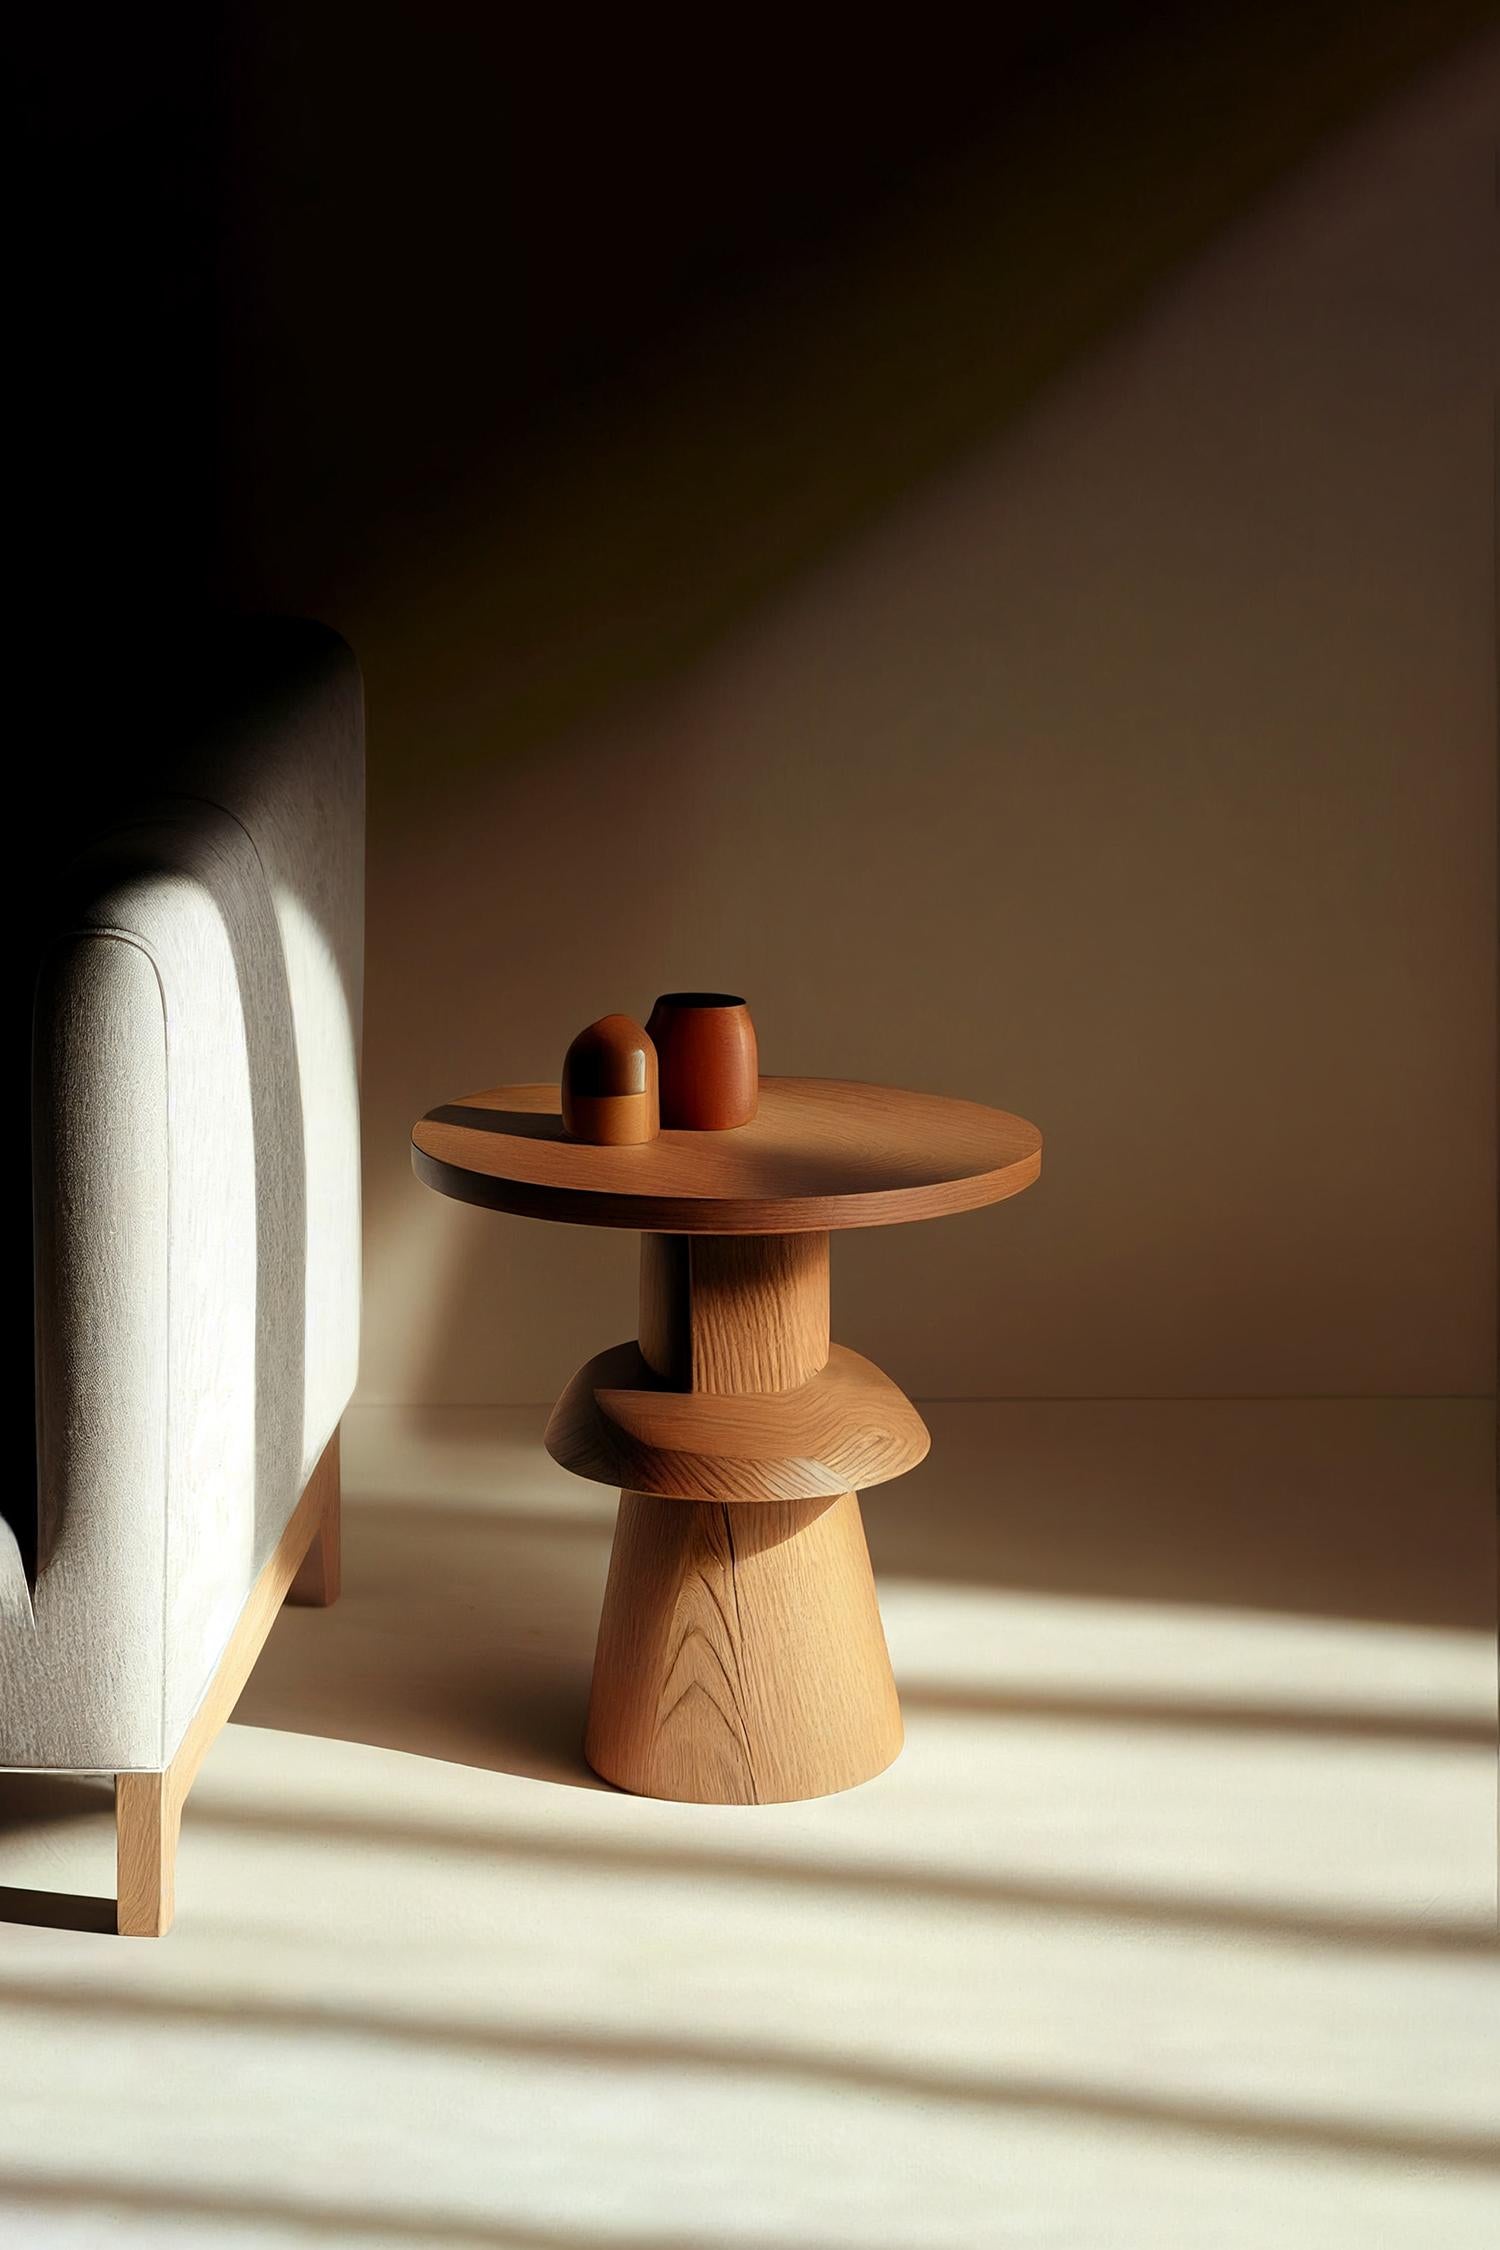 Socle 4 Side Table, Auxiliary Table, Night Stand 

Socle is a small solid wood table designed by the NONO design team. Made of solid wood, its elaborated construction serves as a support, much like a plinth for a statue or sculpture.

In the past,